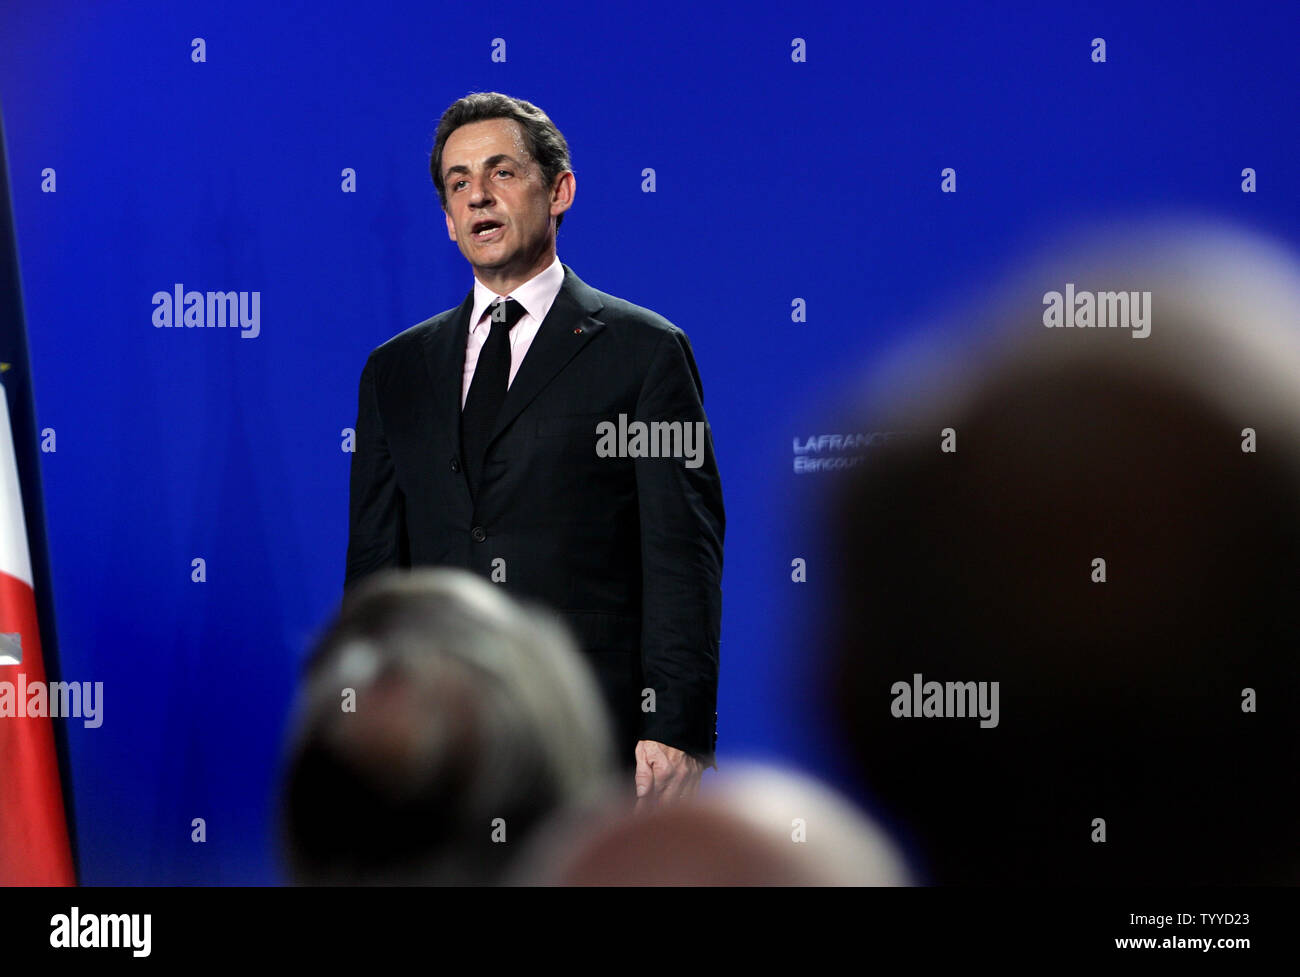 French President Nicolas Sarkozy campaigns at a public meeting on March 28, 2012 in Elancourt, near Paris, France. Polls showed that the conservative candidate has caught up with his Socialist challenger in the first round of a presidential election next month. UPI/Eco Clement Stock Photo